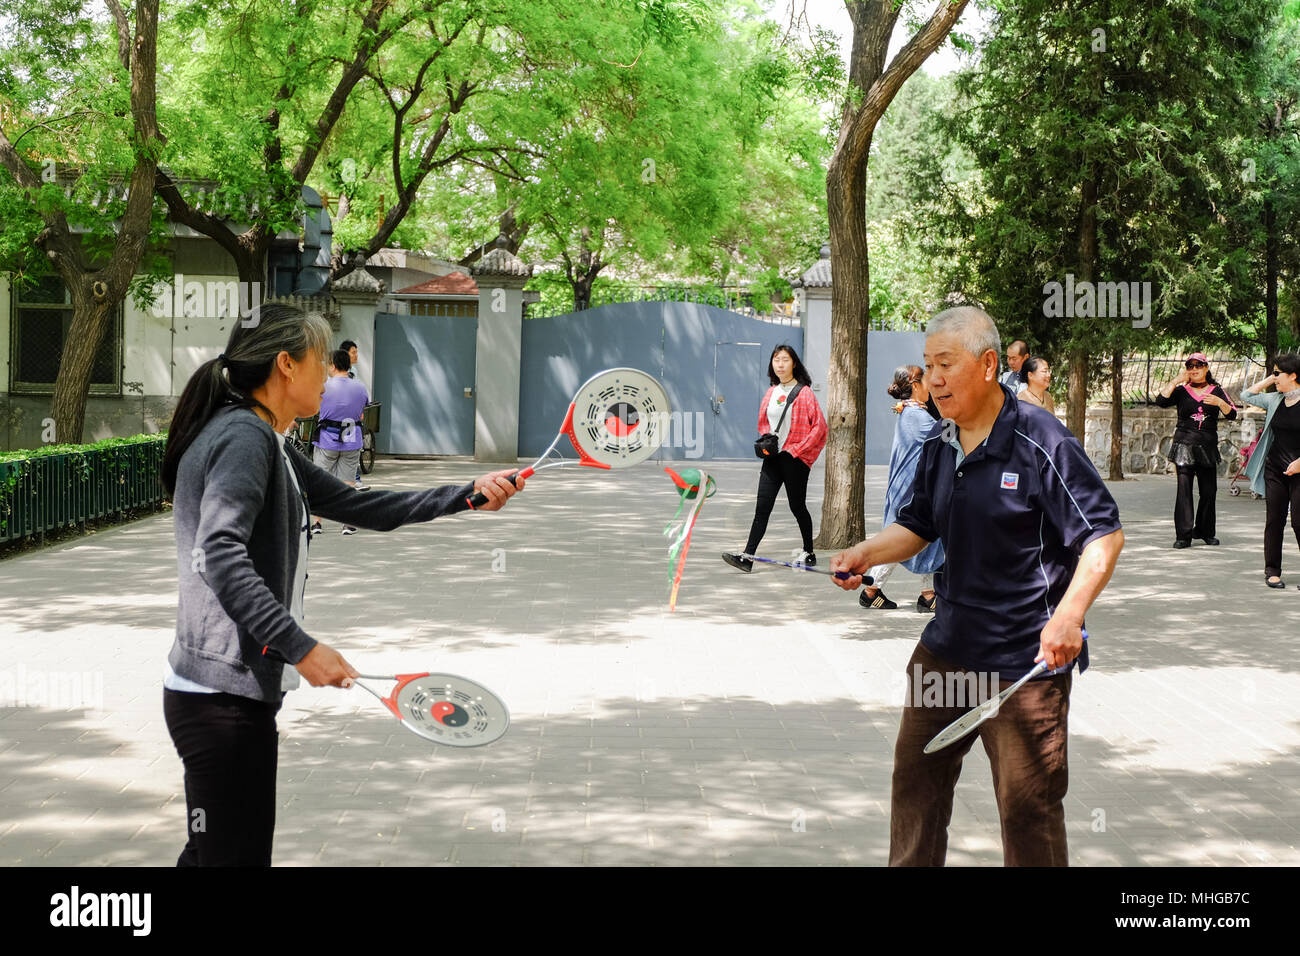 BEIJING, CHINA - APRIL 30, 2018: Chinese racket and ball dance in a park. Taoranting Park is a major city park located in Xicheng District in the sout Stock Photo